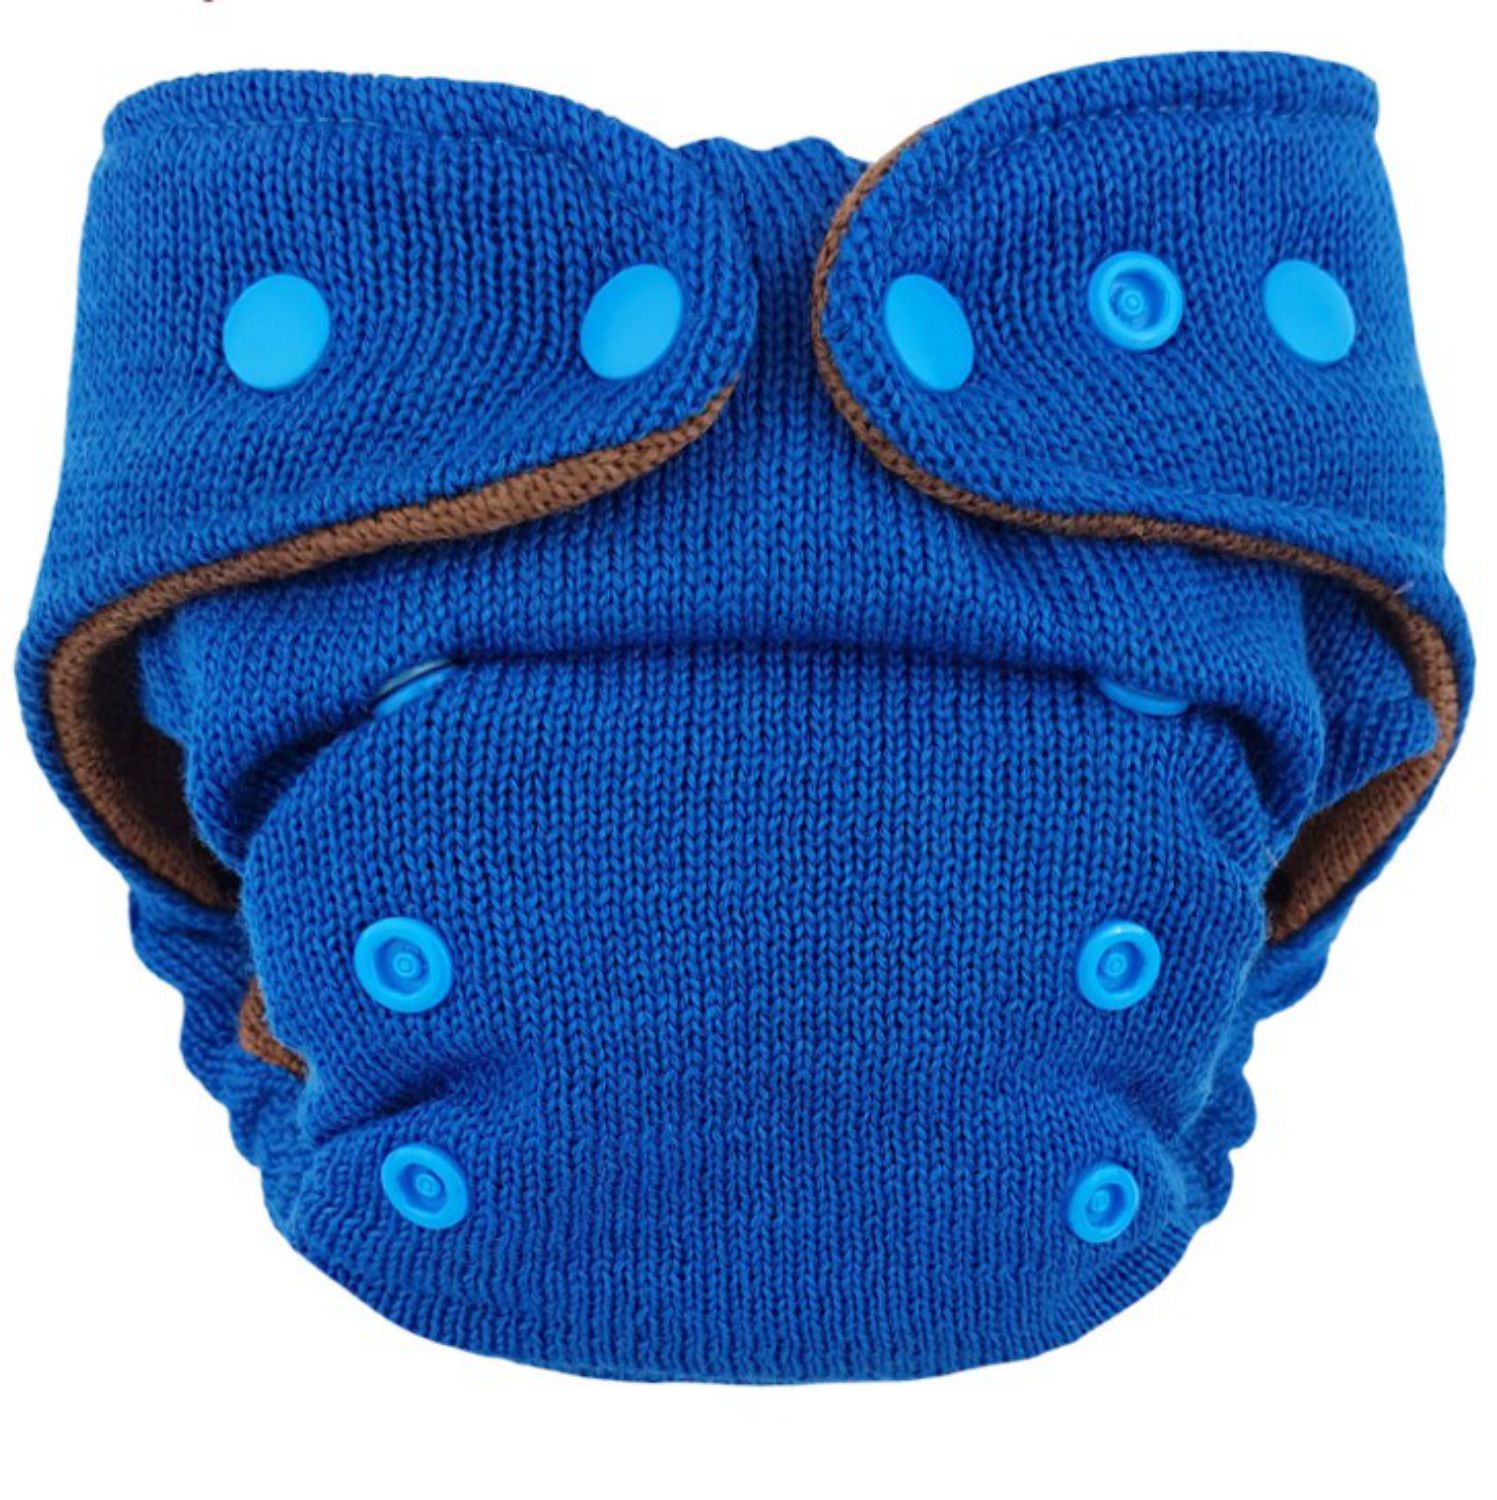 Magabi Merino Wool Cover OS (knitted) (Color: (2) Azure)